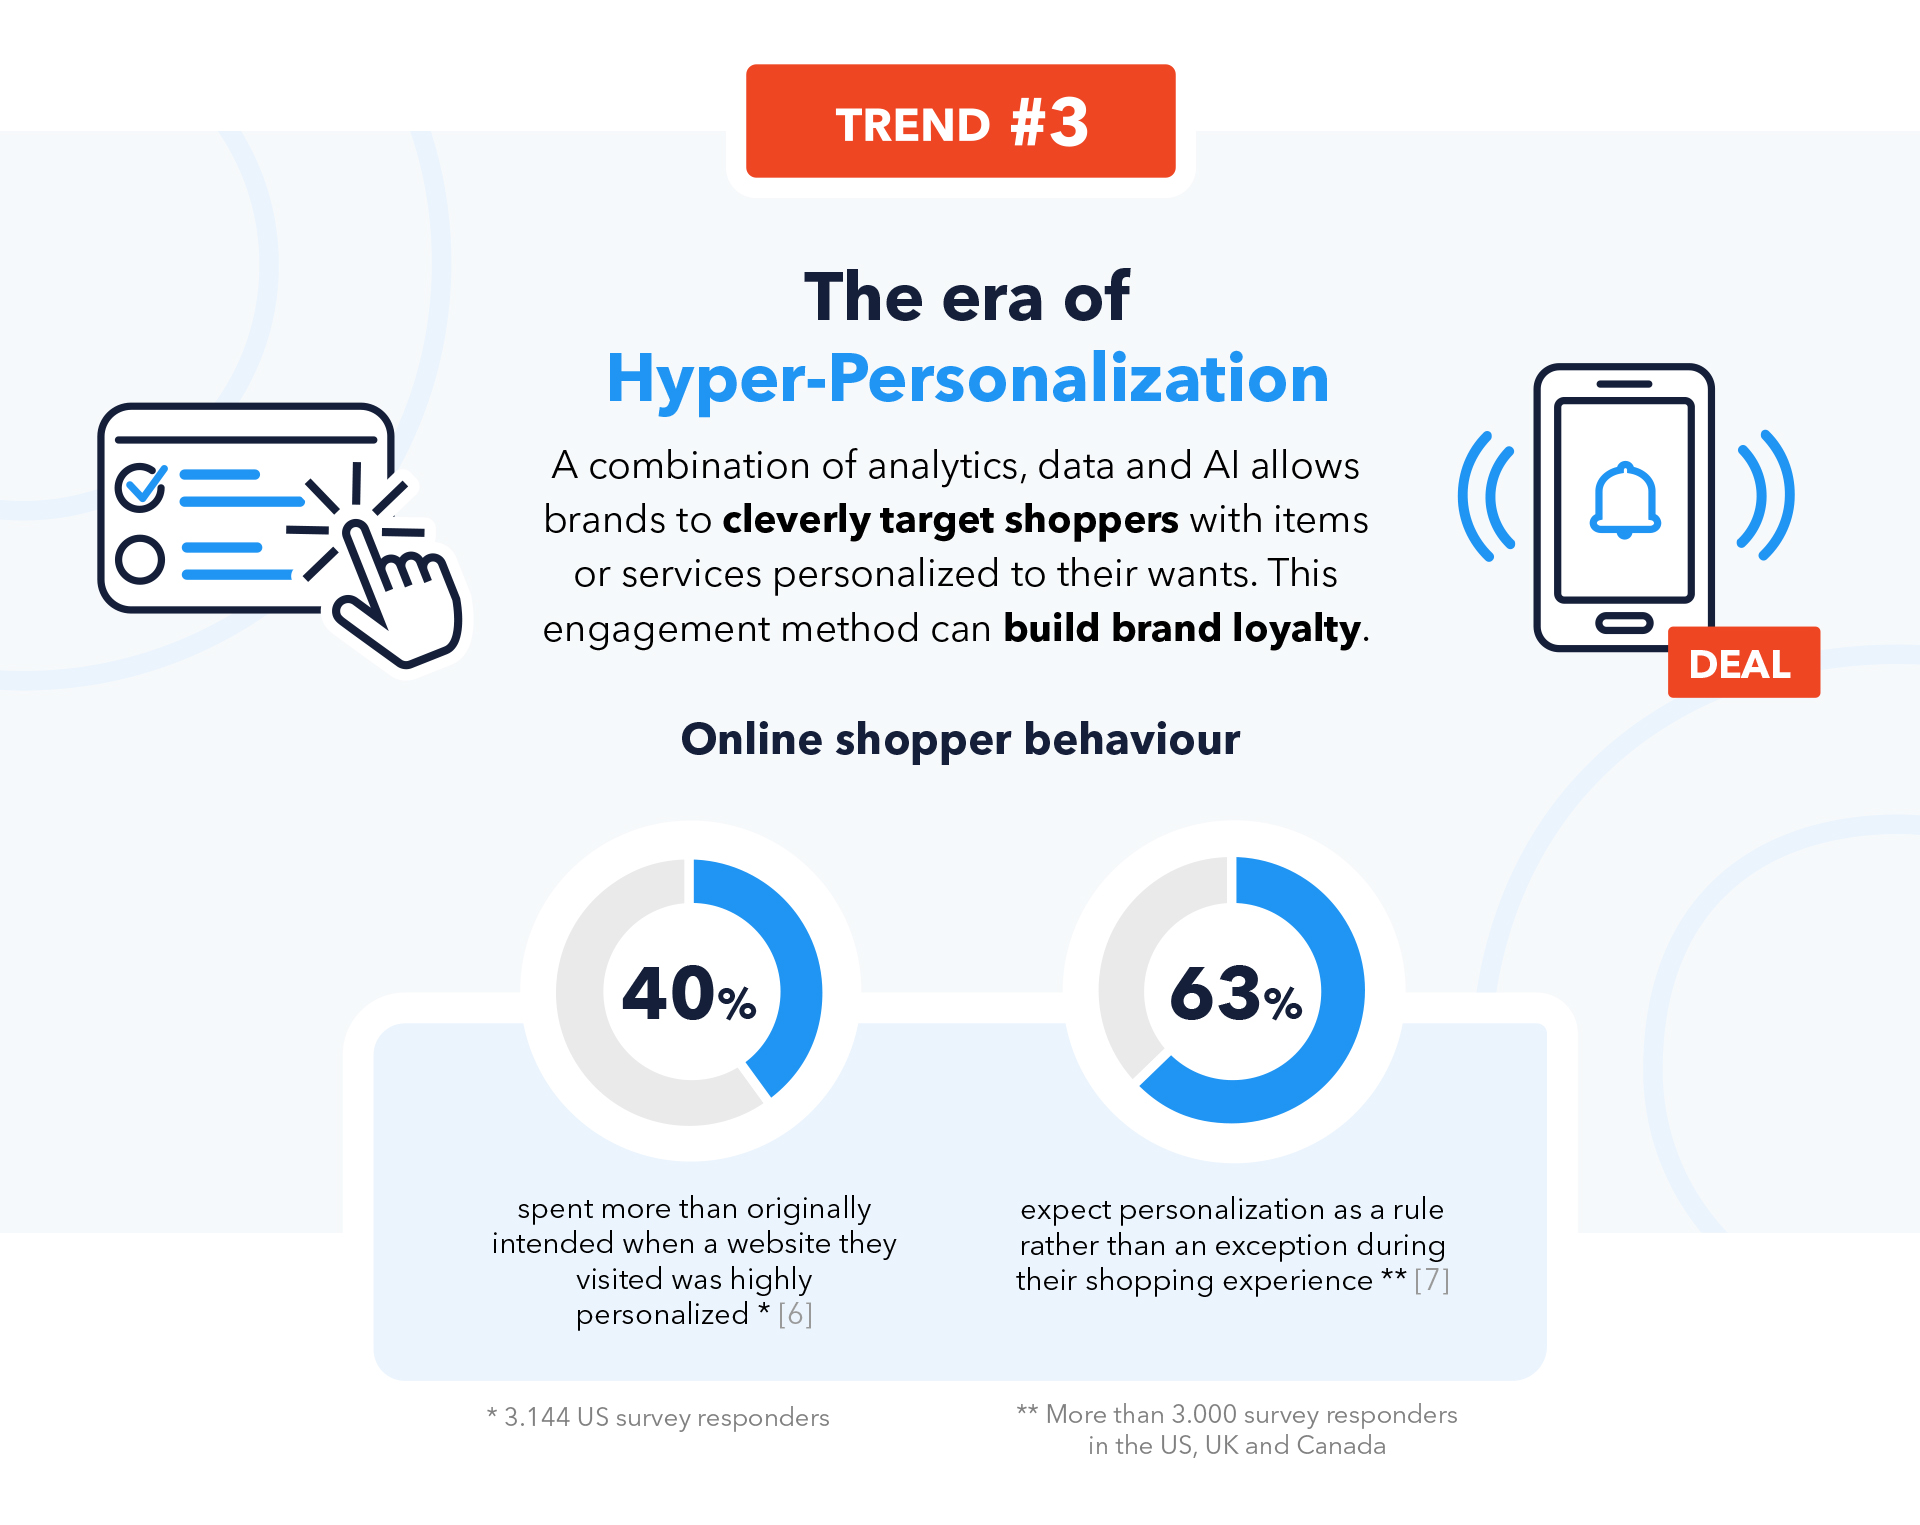 The 3 Ecommerce trends driving customer expectations – and sales